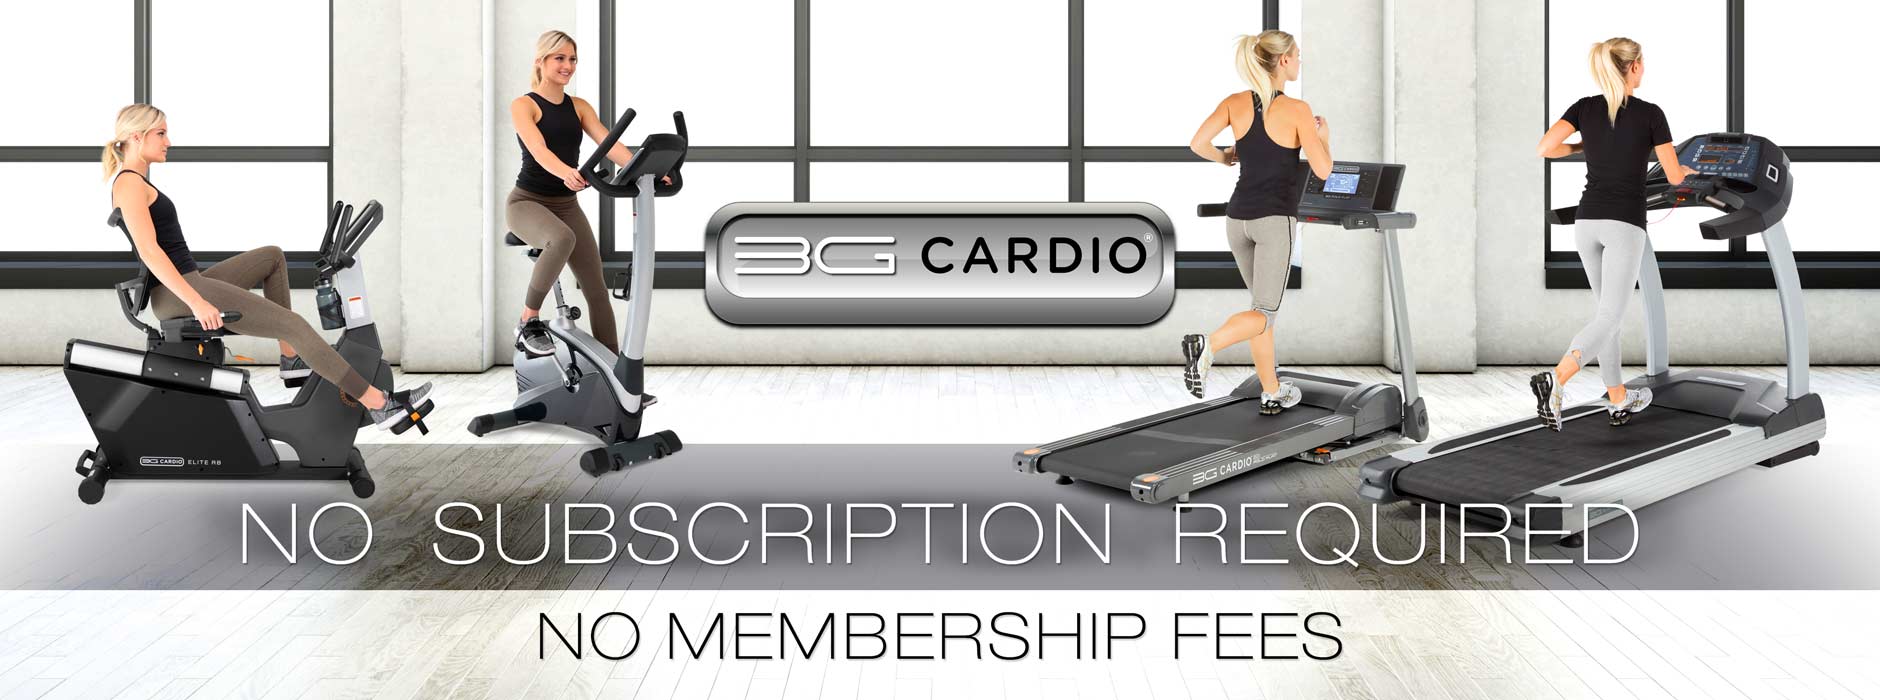 No Subscription Required With Award-Winning 3G Cardio Treadmills And Exercise Bikes